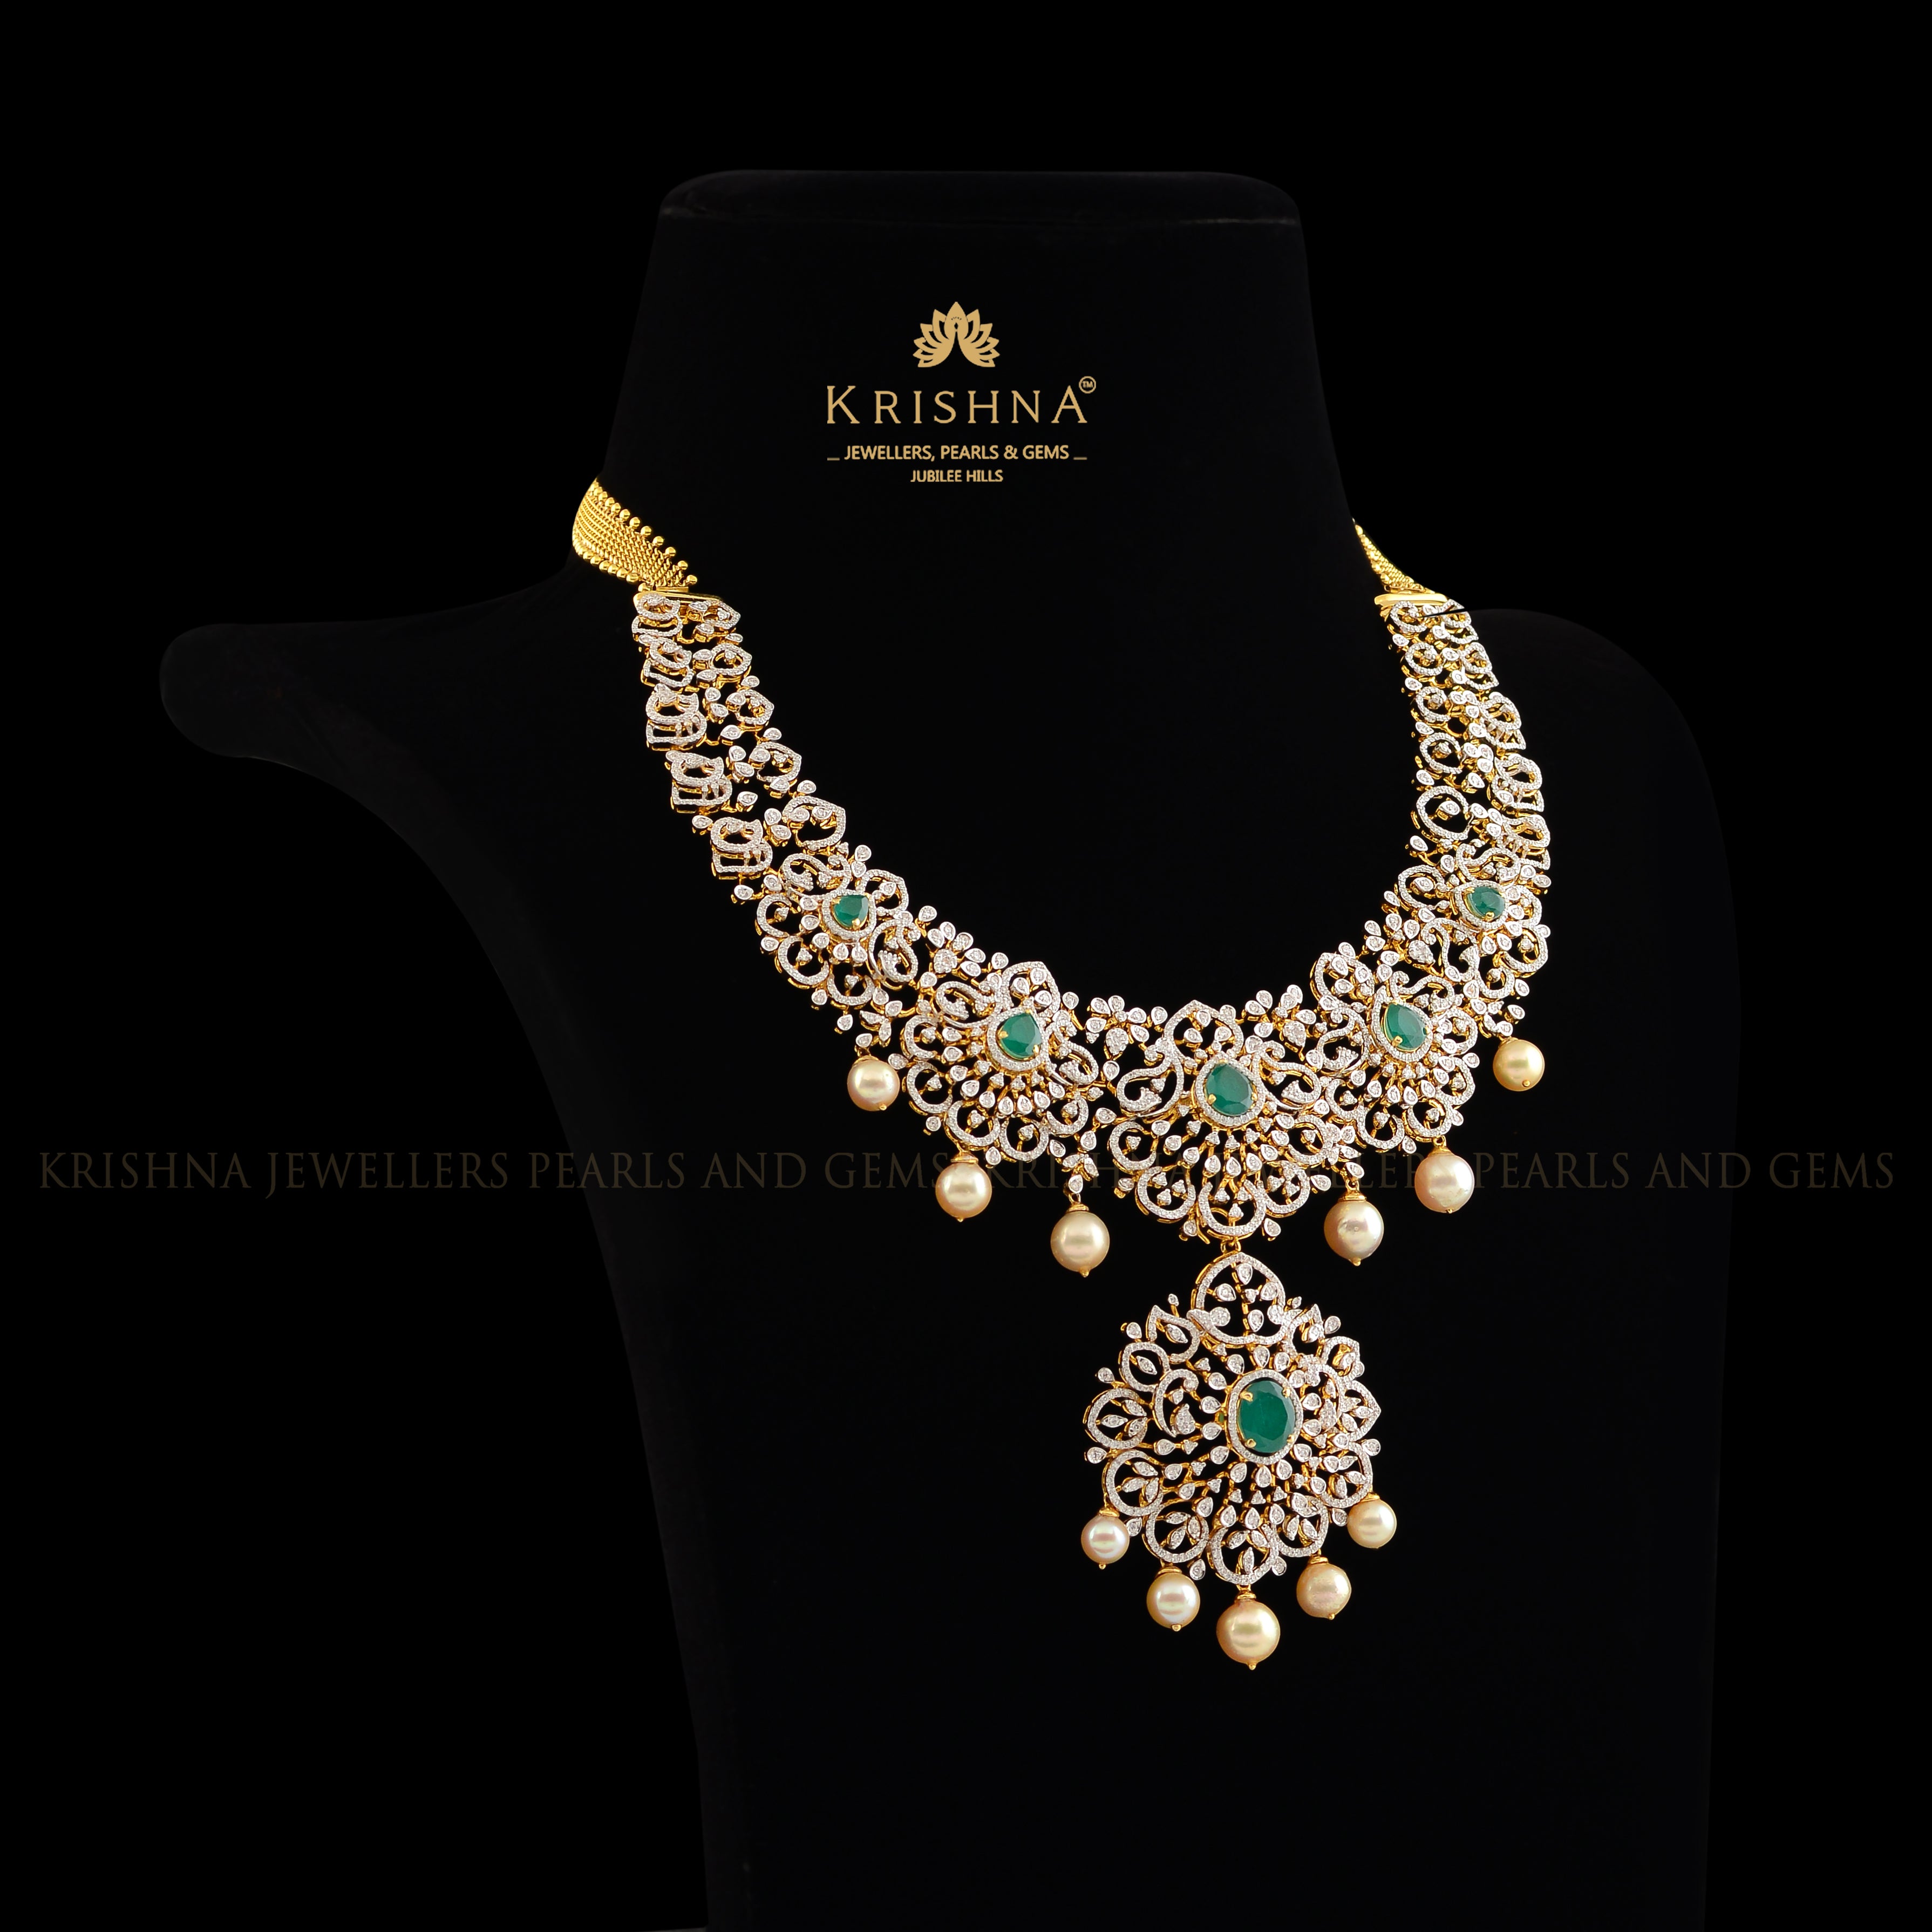 Diamond Necklace in Floral Elegance